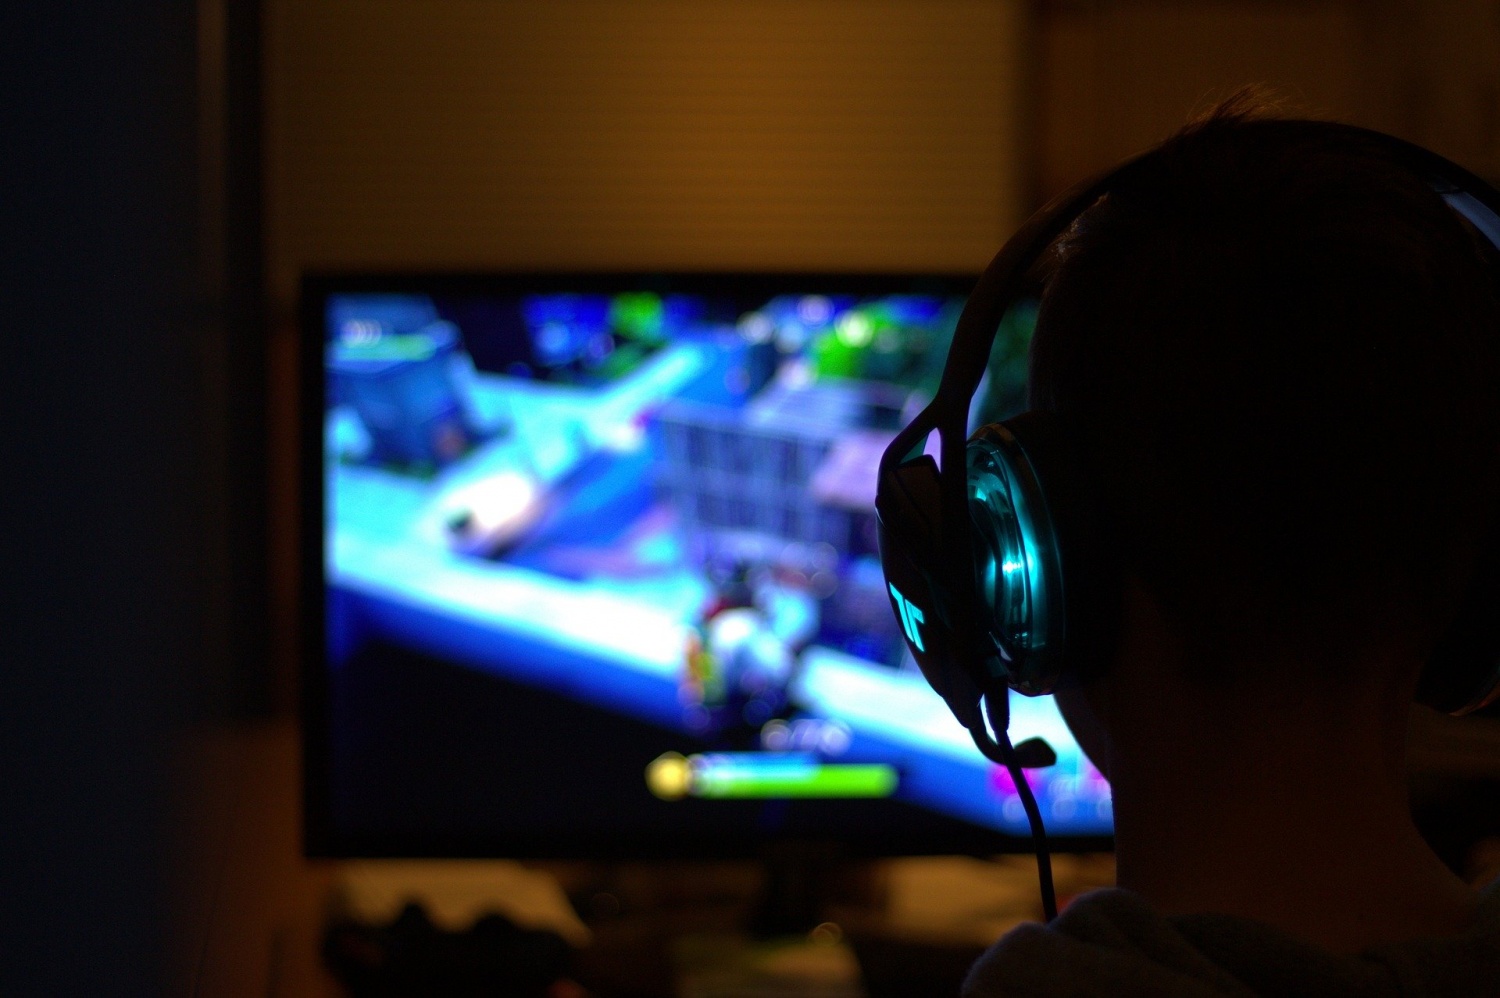 New Lawsuit Alleges Fortnite Video Game Is as Addictive as Cocaine